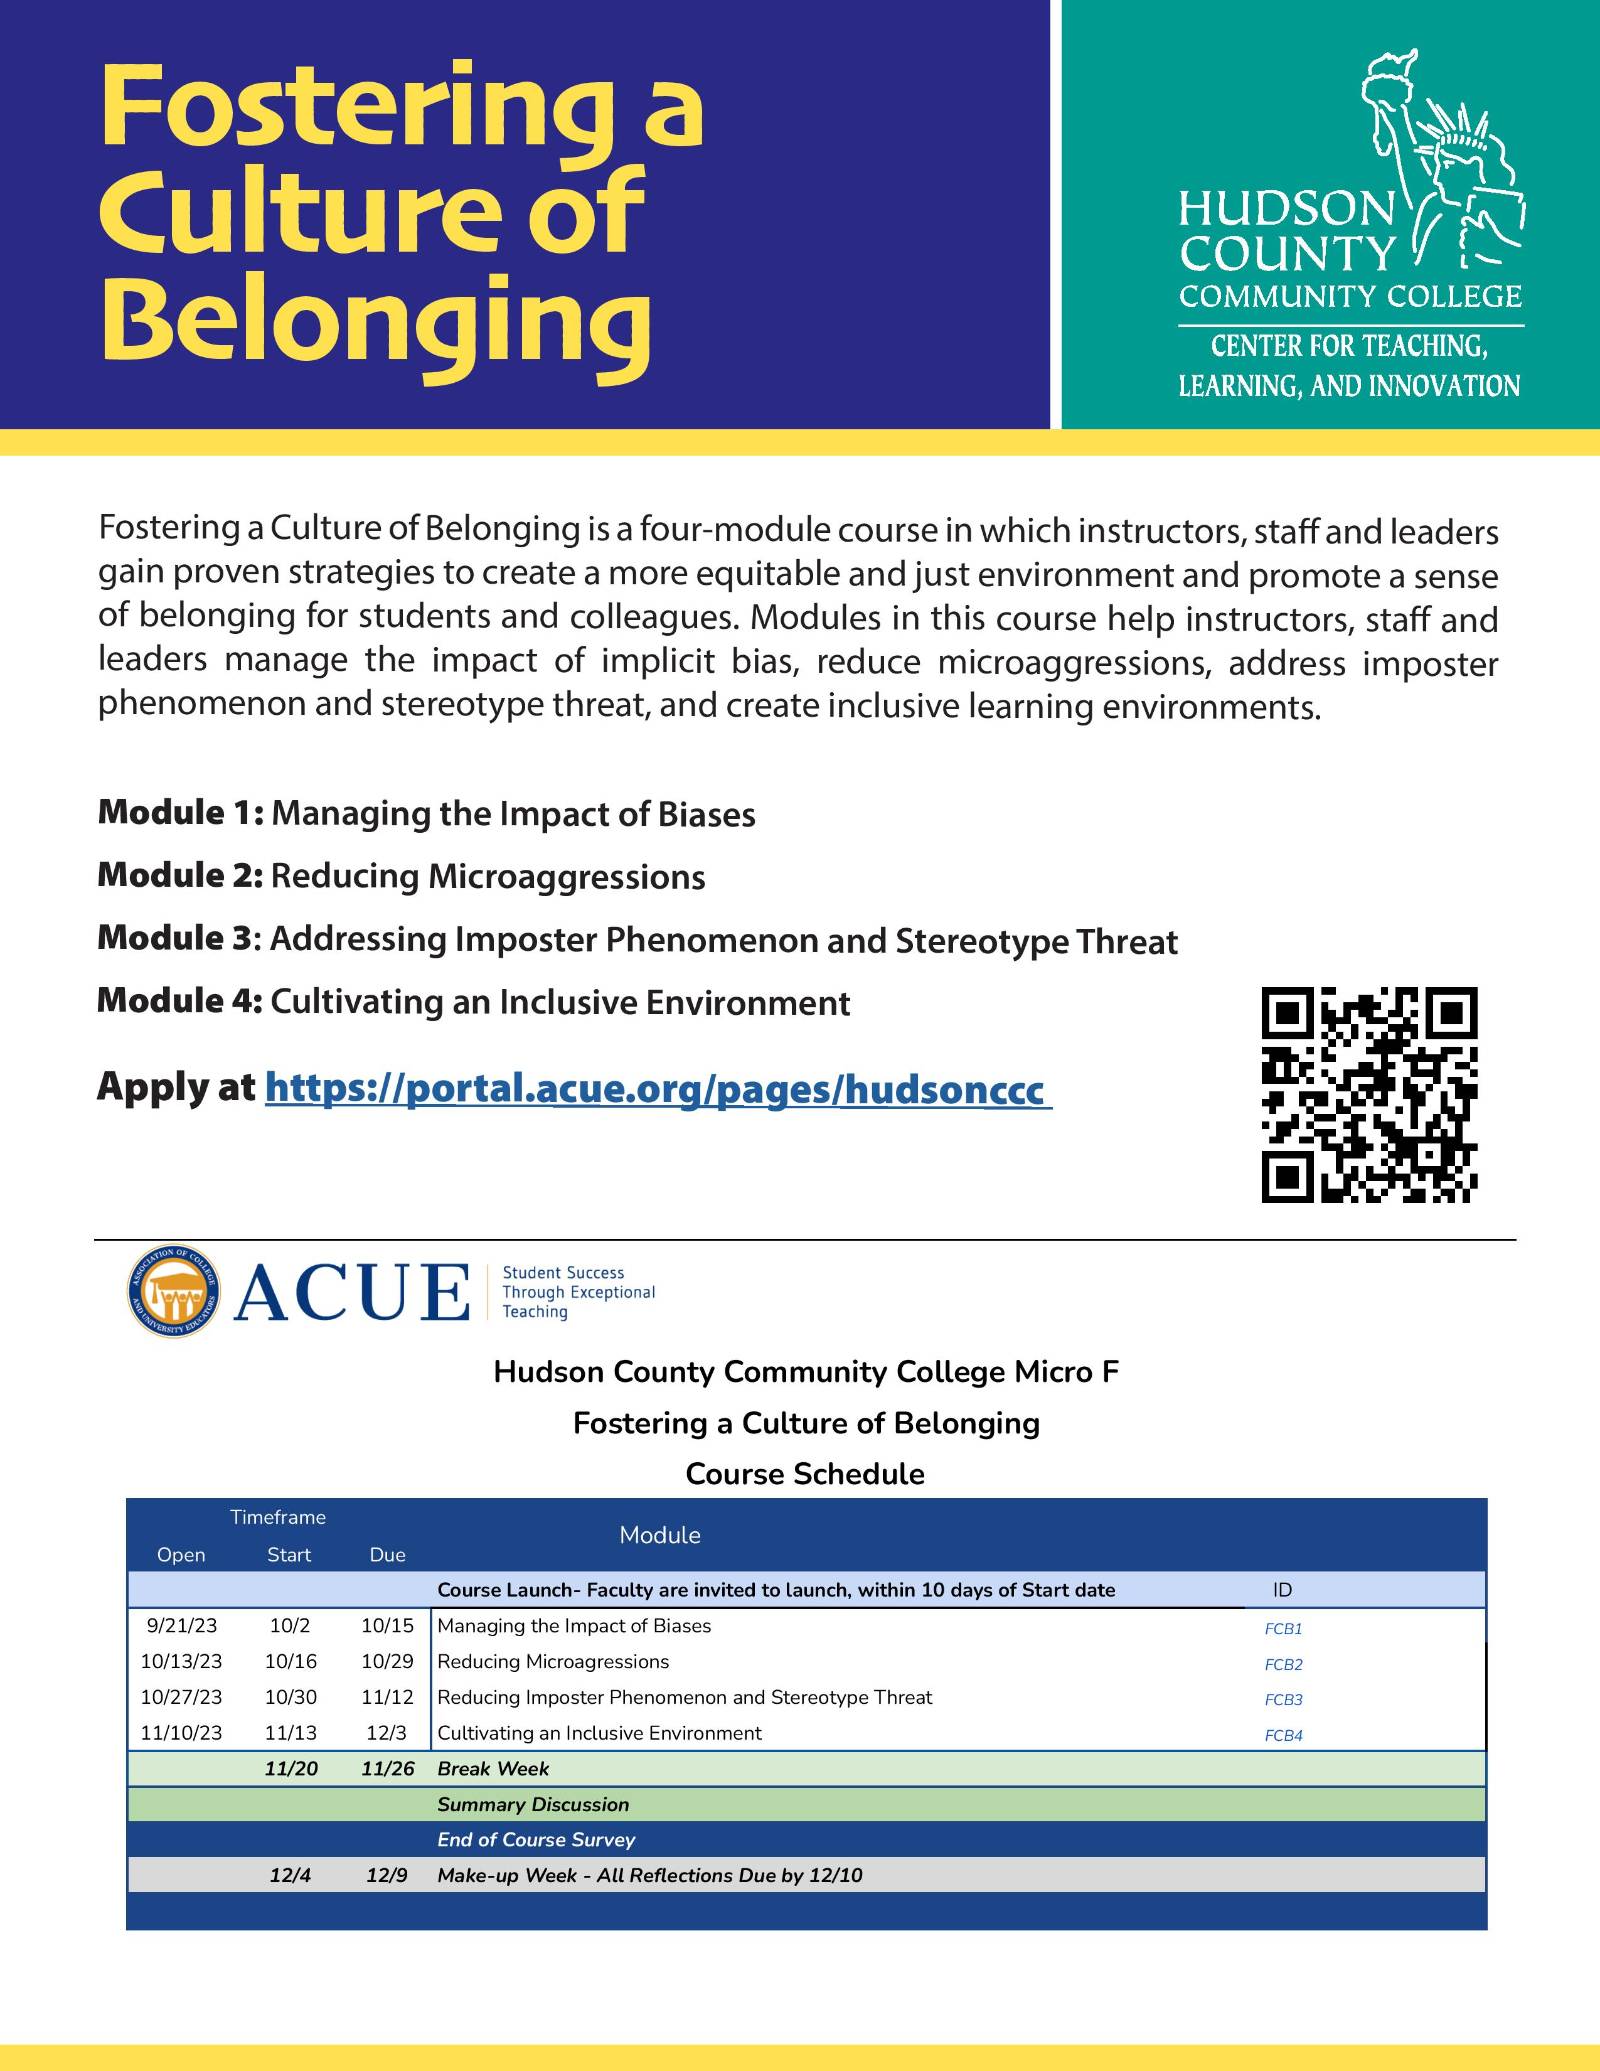 ACUE - Fostering a Culture of Belonging